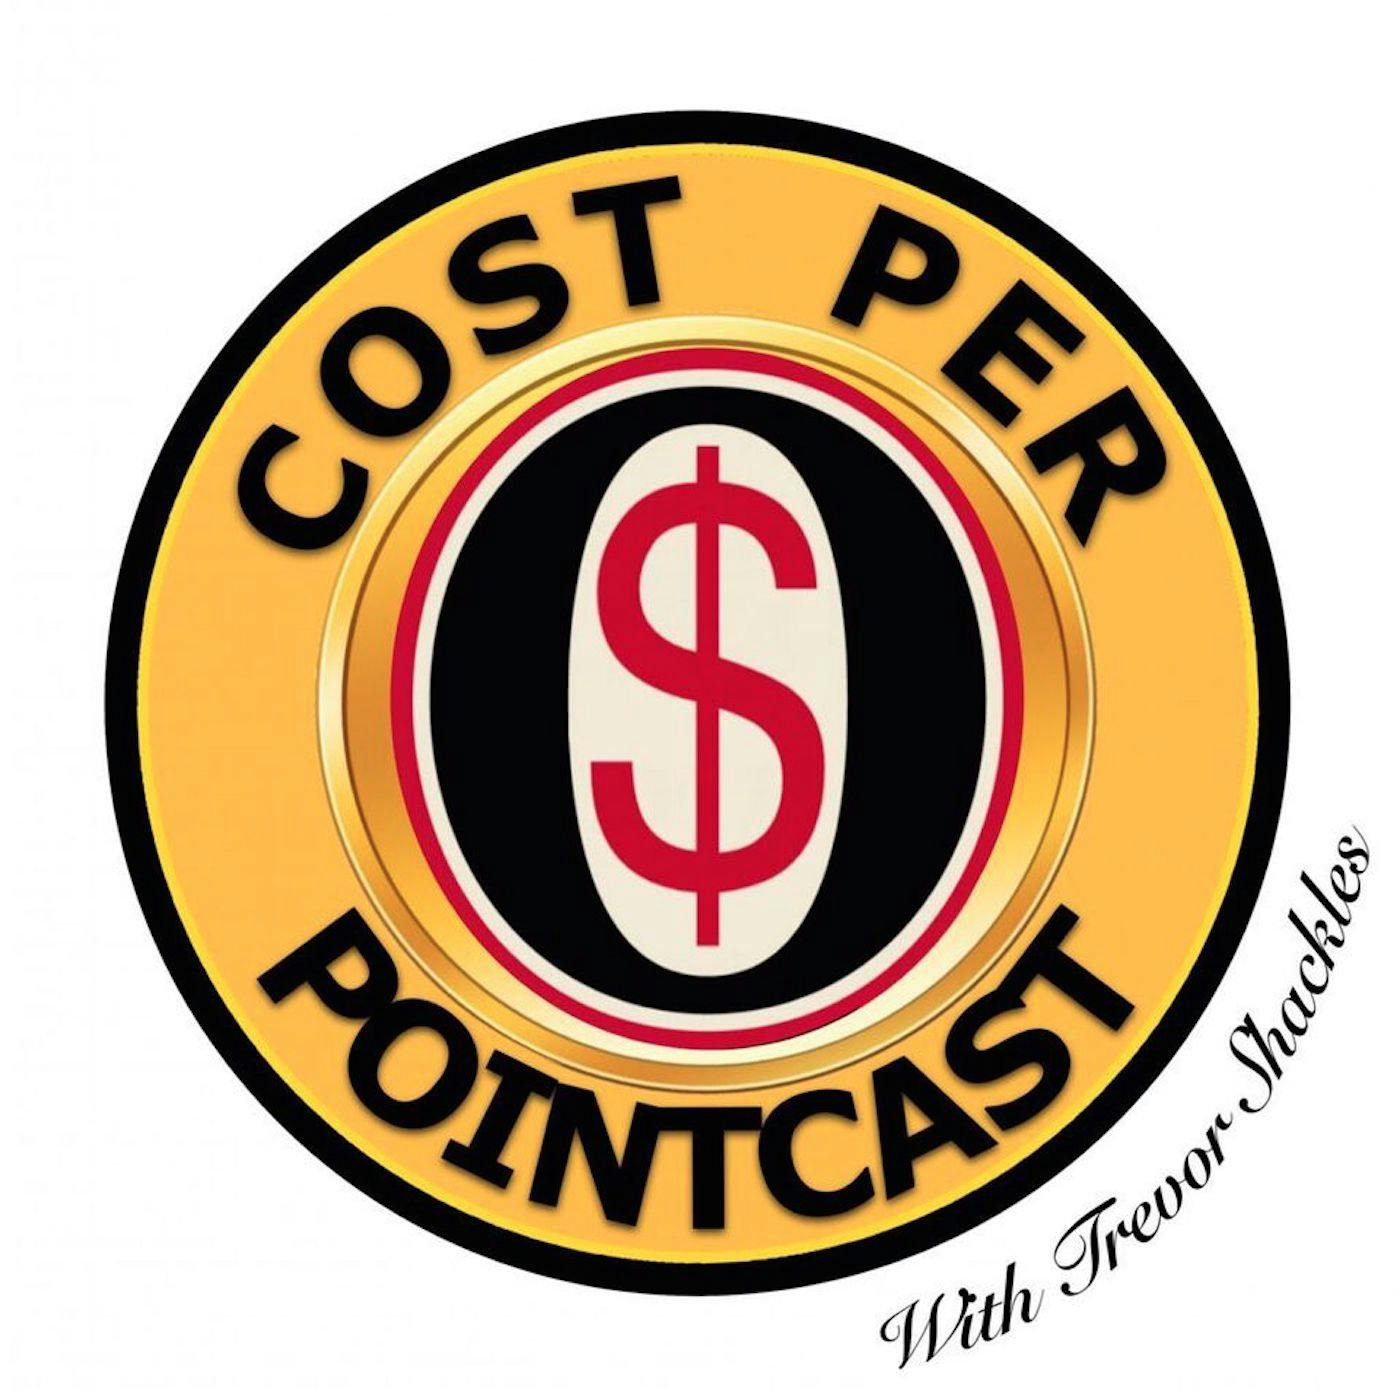 Cost Per Pointcast, Ep. 27: Karlsson Survives the Deadline ft. Ian Mendes